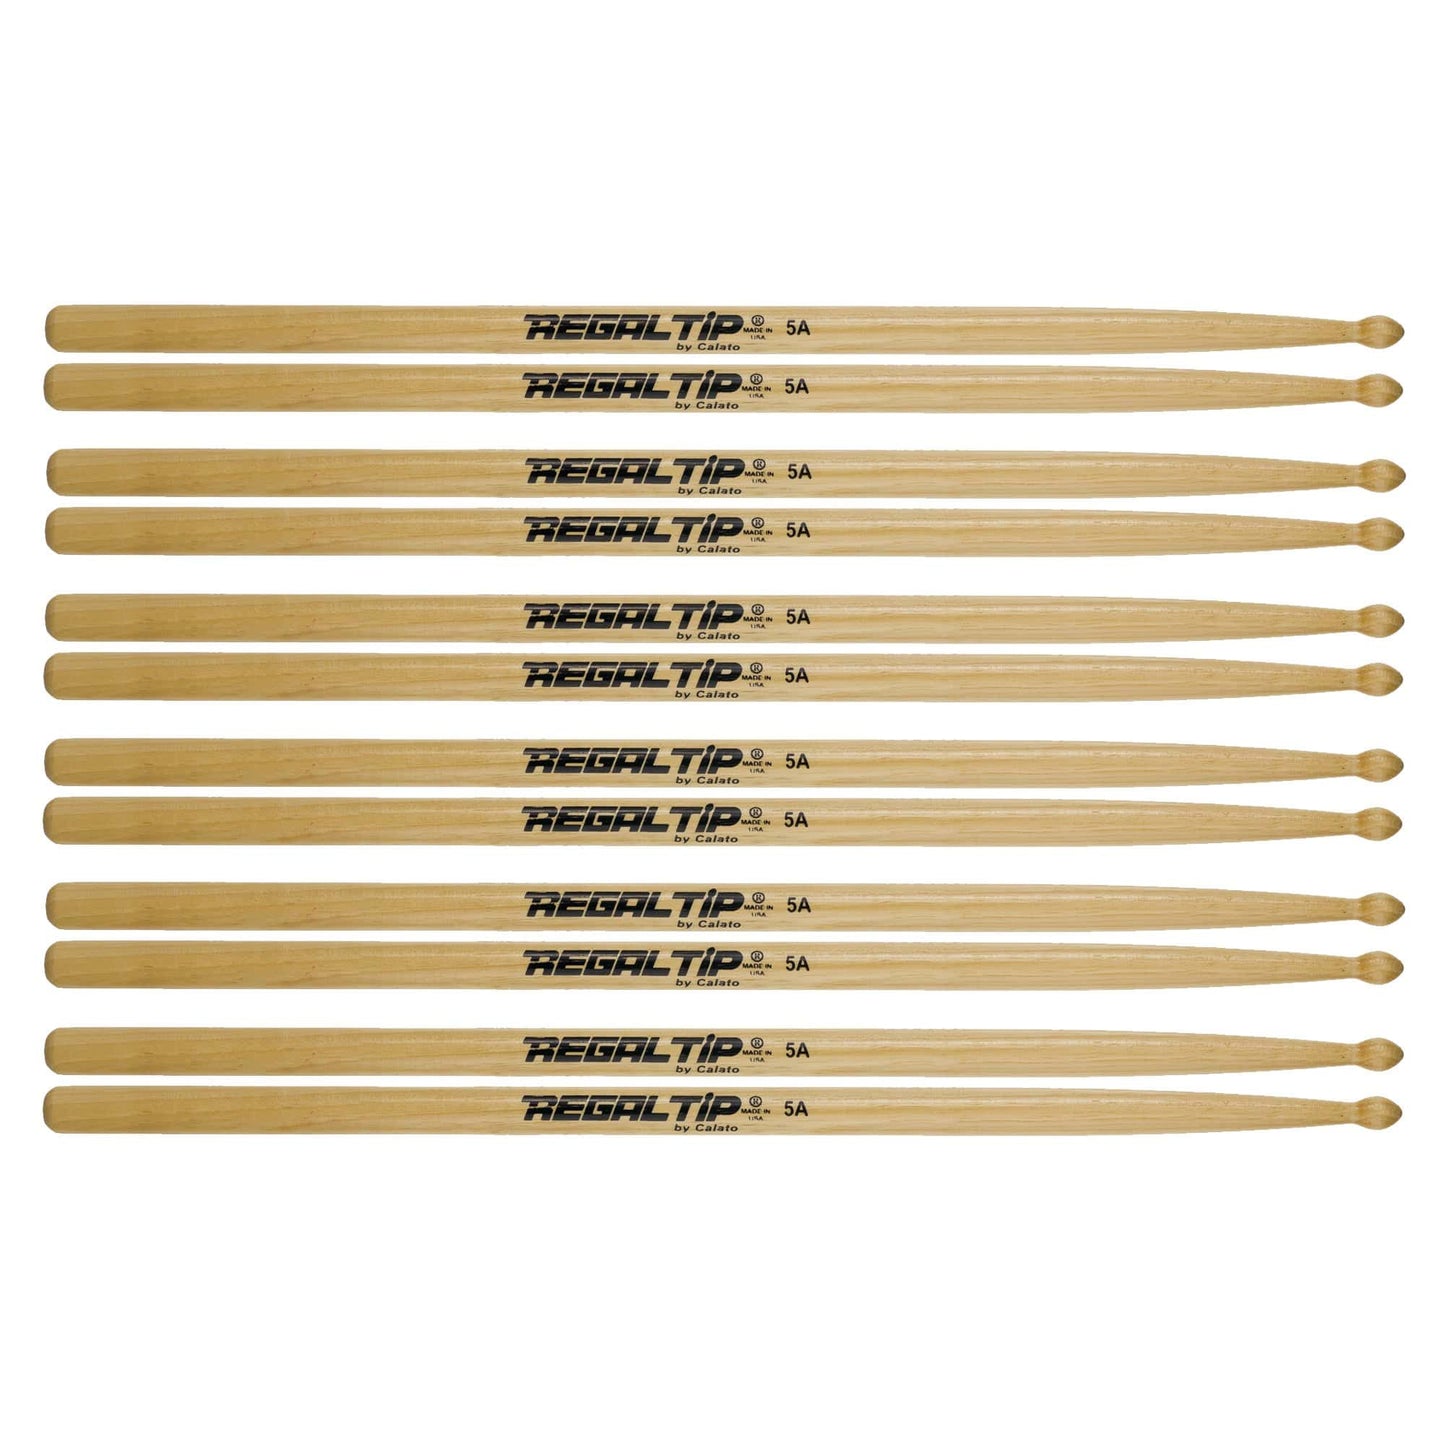 Regal Tip 5A American Hickory Wood Tip Drum Sticks (6 Pair Bundle) Drums and Percussion / Parts and Accessories / Drum Sticks and Mallets